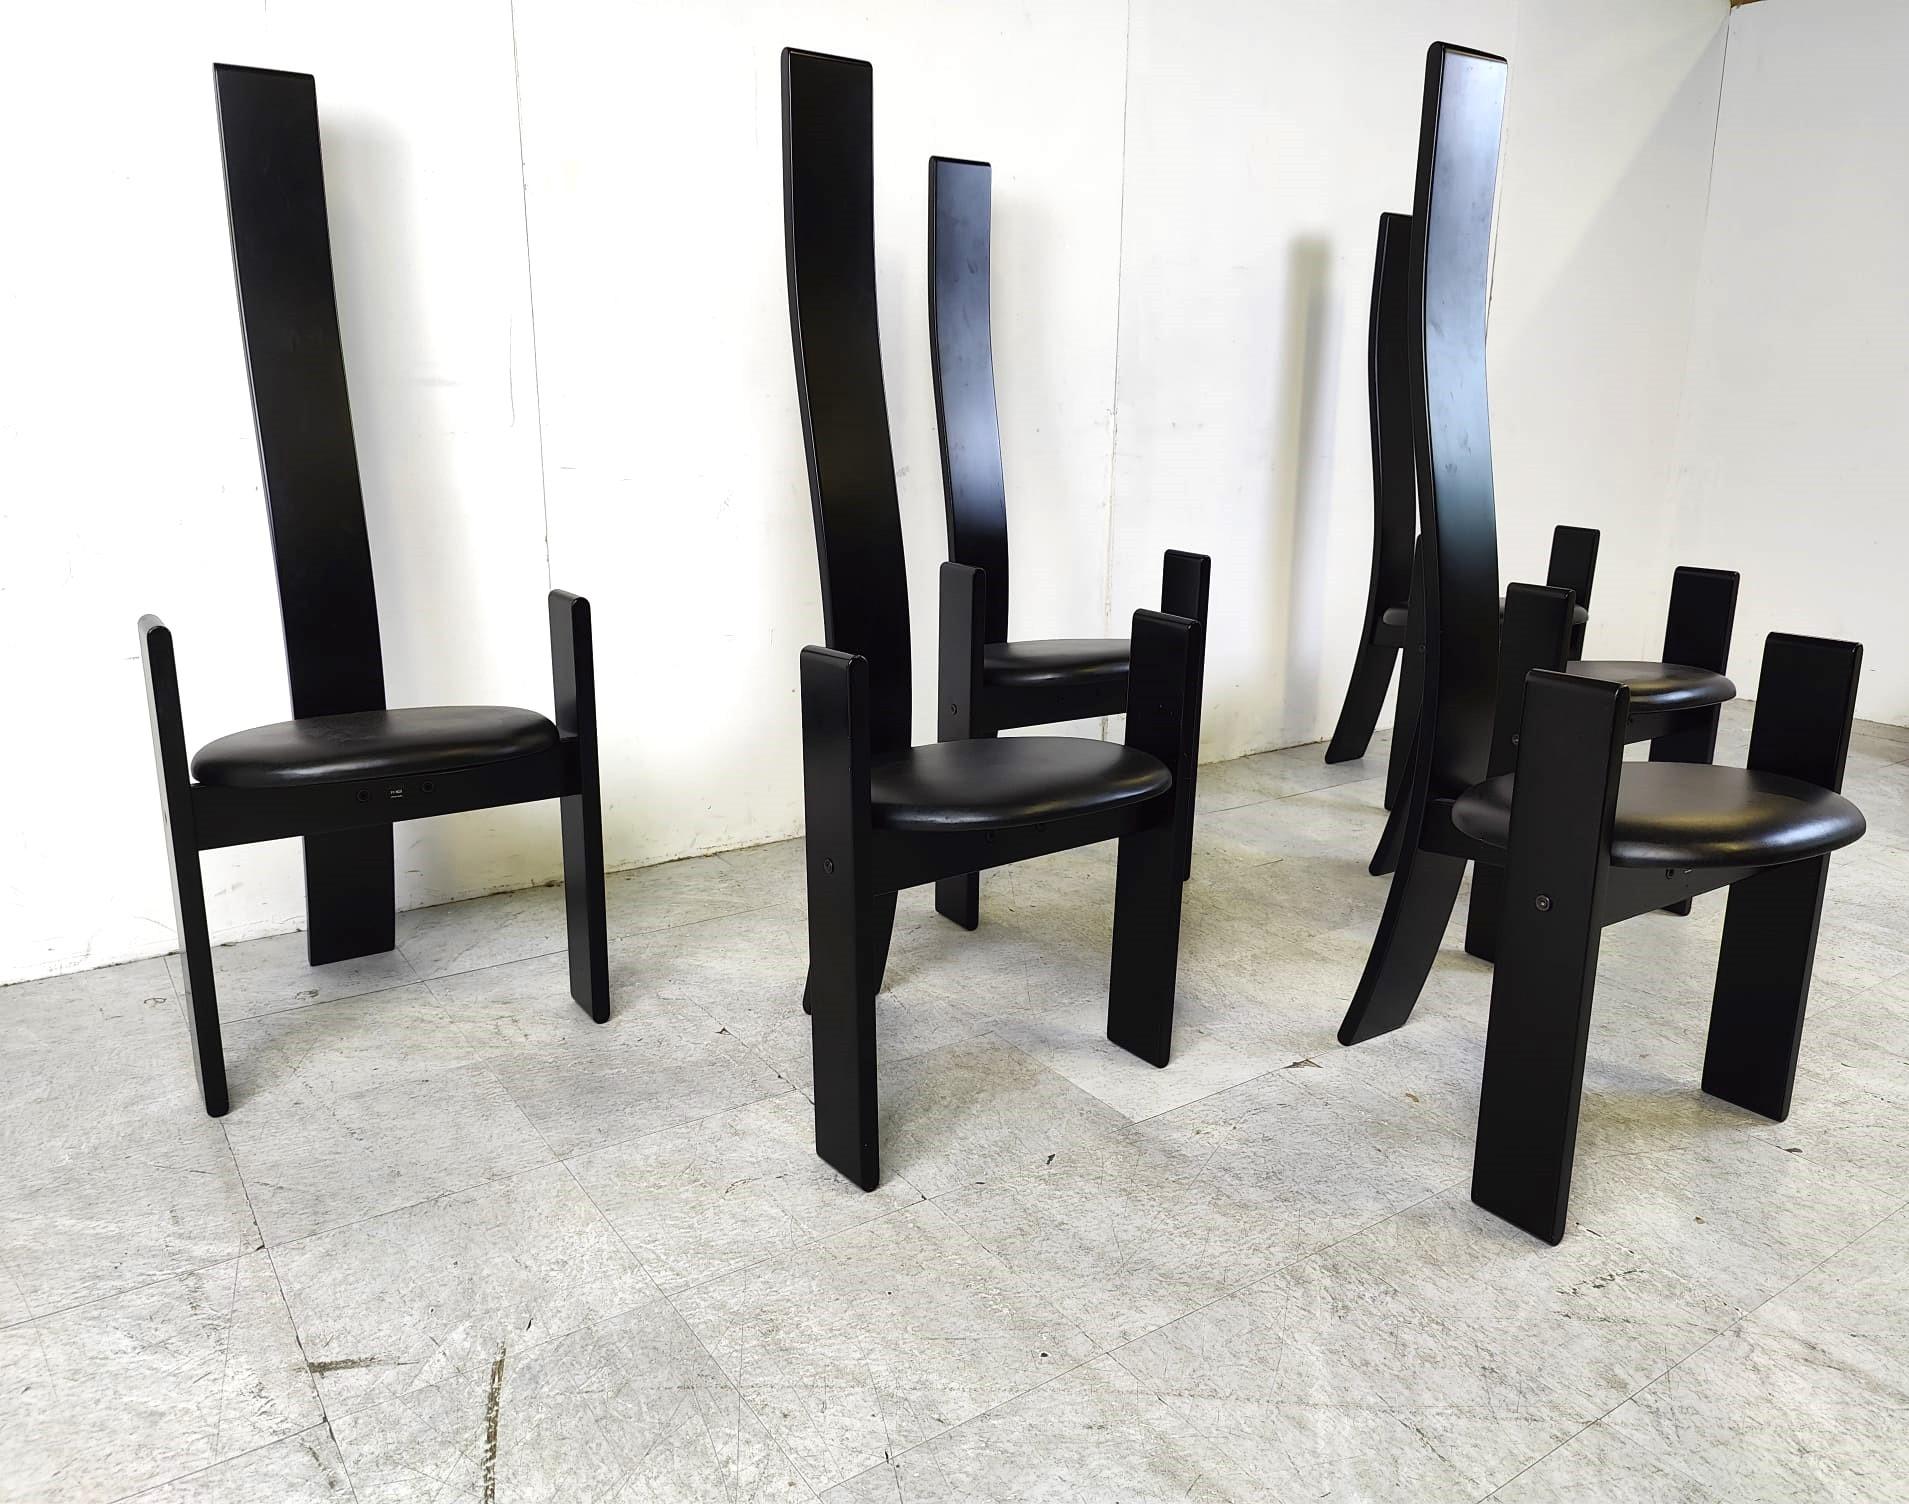 Post-Modern Golem chairs by Vico Magistretti, set of 6, 1970s For Sale